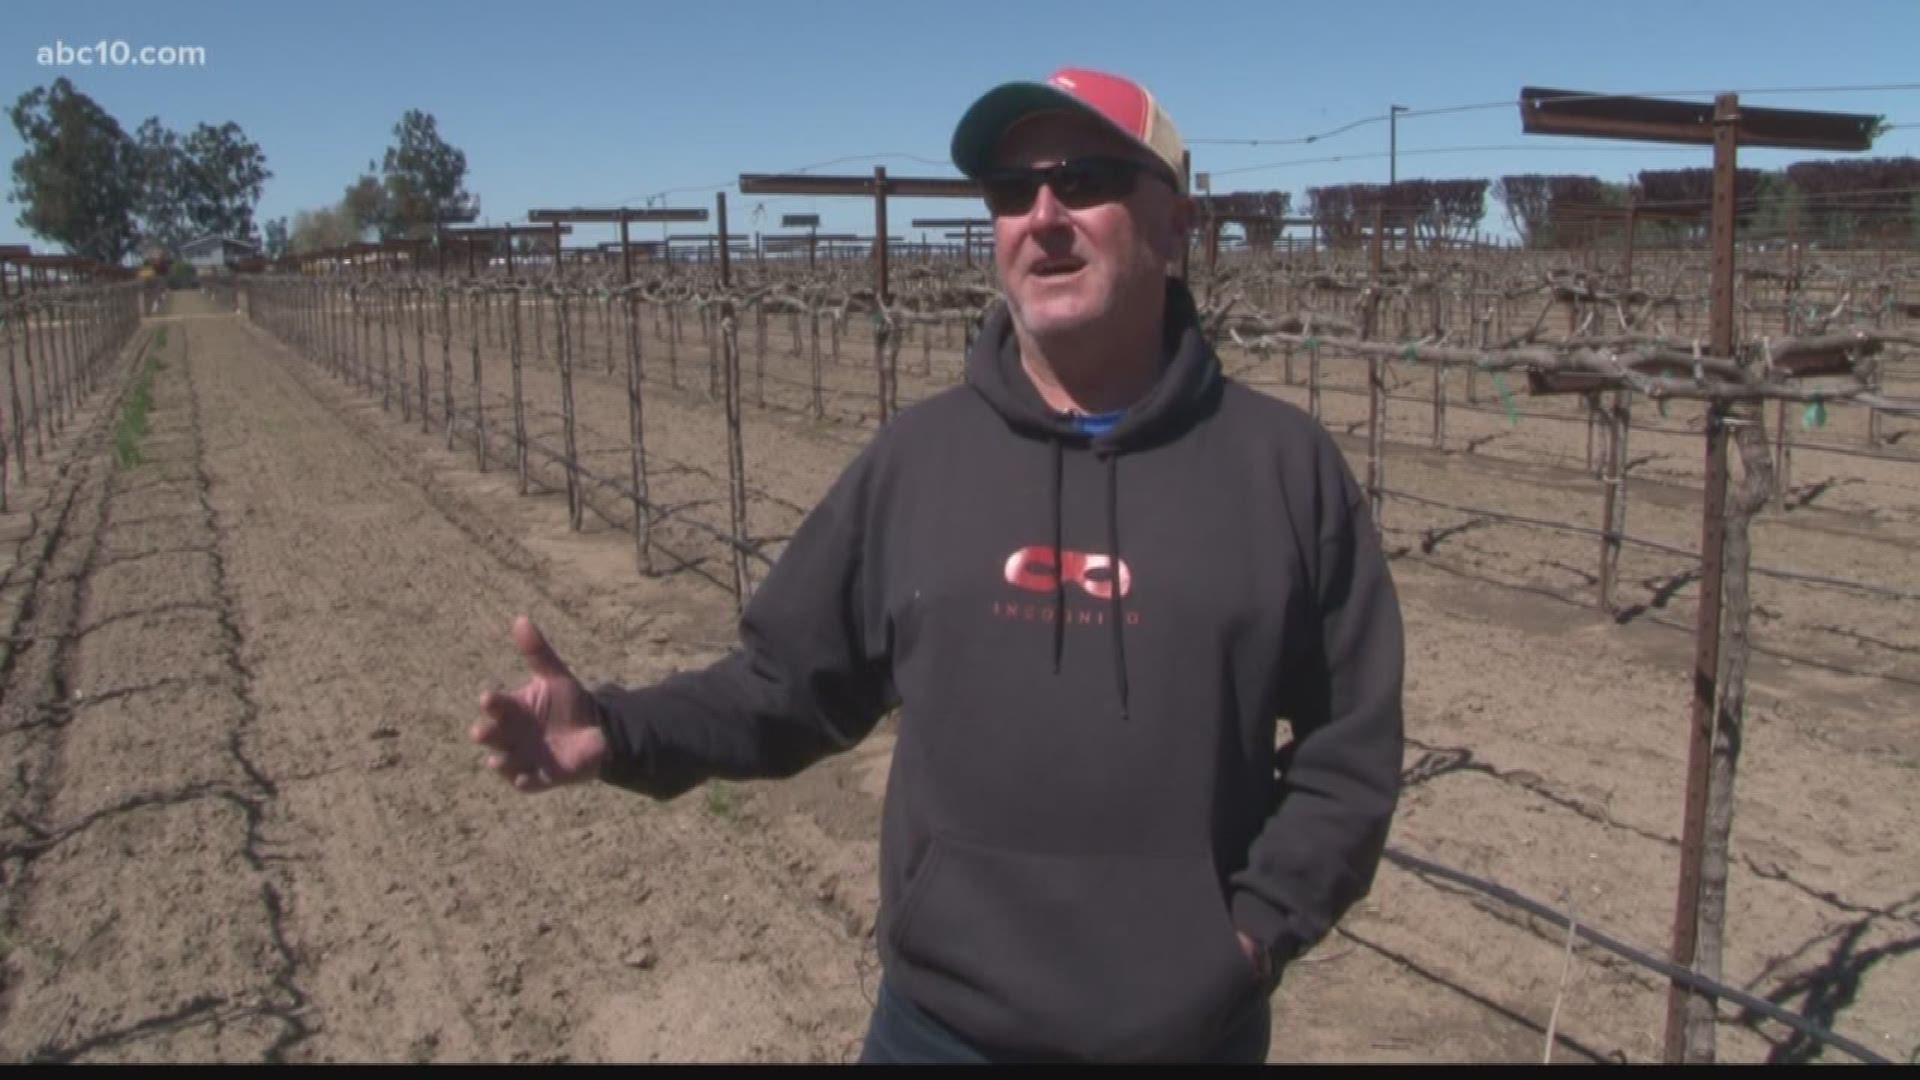 Lodi winemaker Dave Phillips says he learned in school that tariffs are never a good thing.